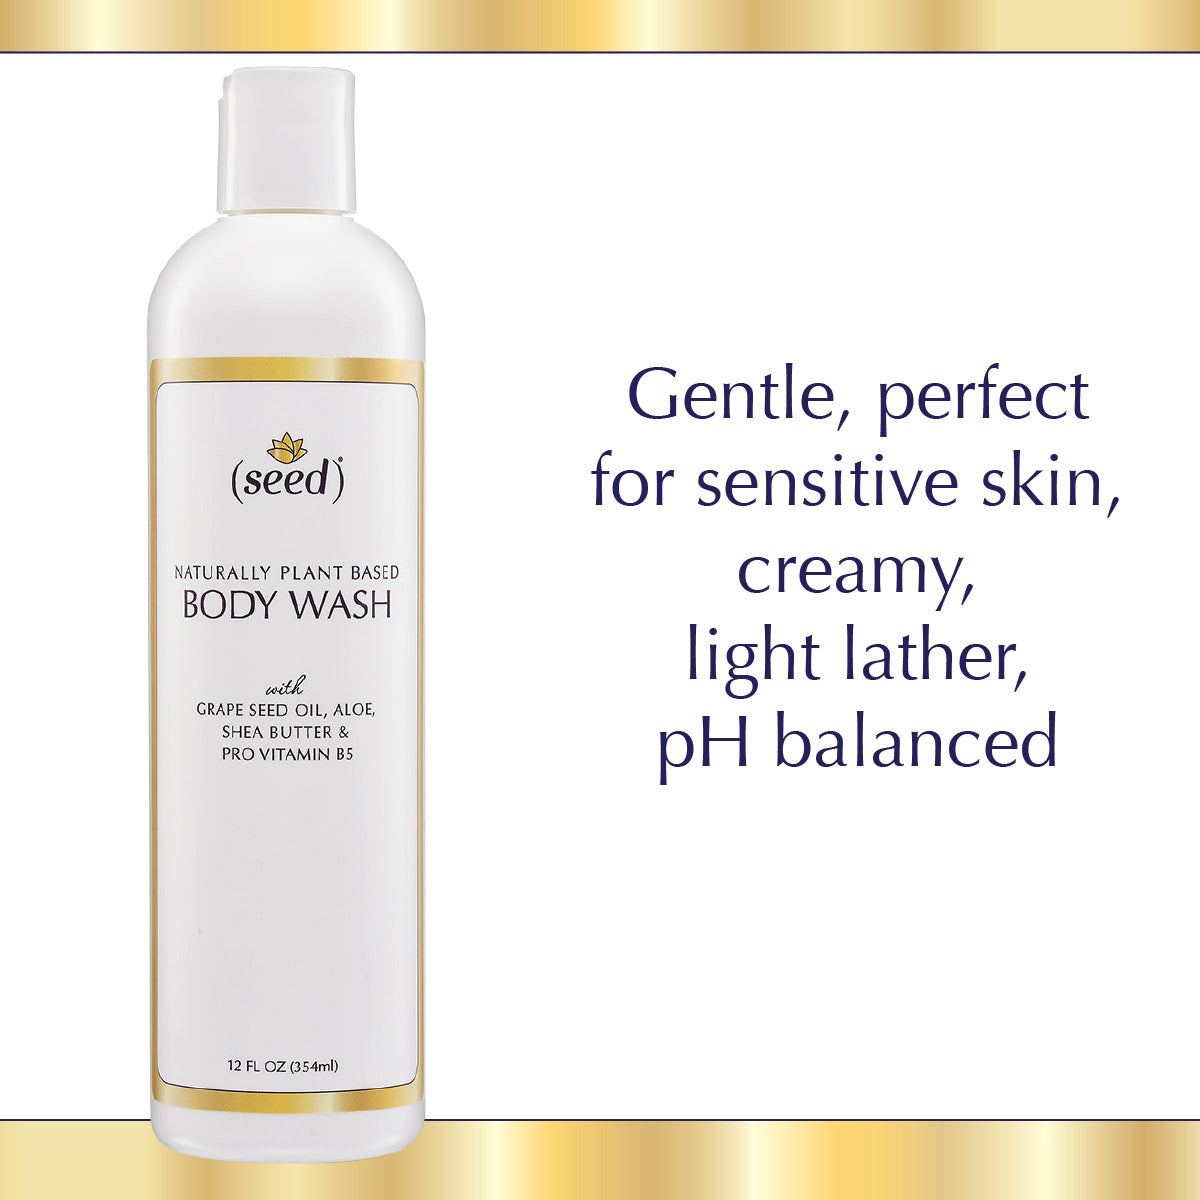 Seed Body Wash is gentle for sensitive skin with light lather and pH balanced